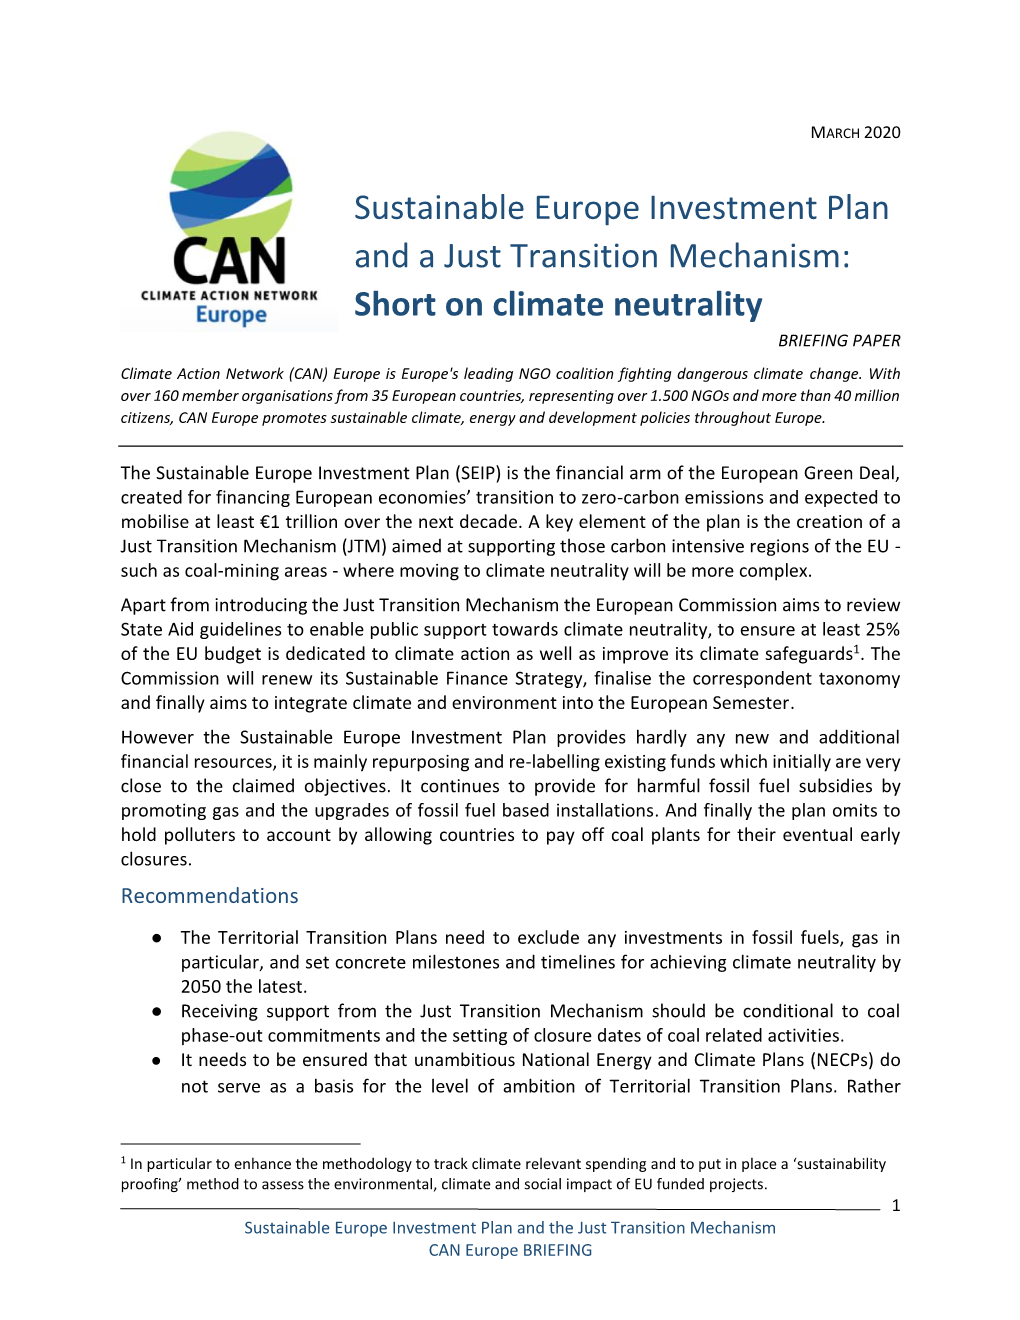 Sustainable Europe Investment Plan and a Just Transition